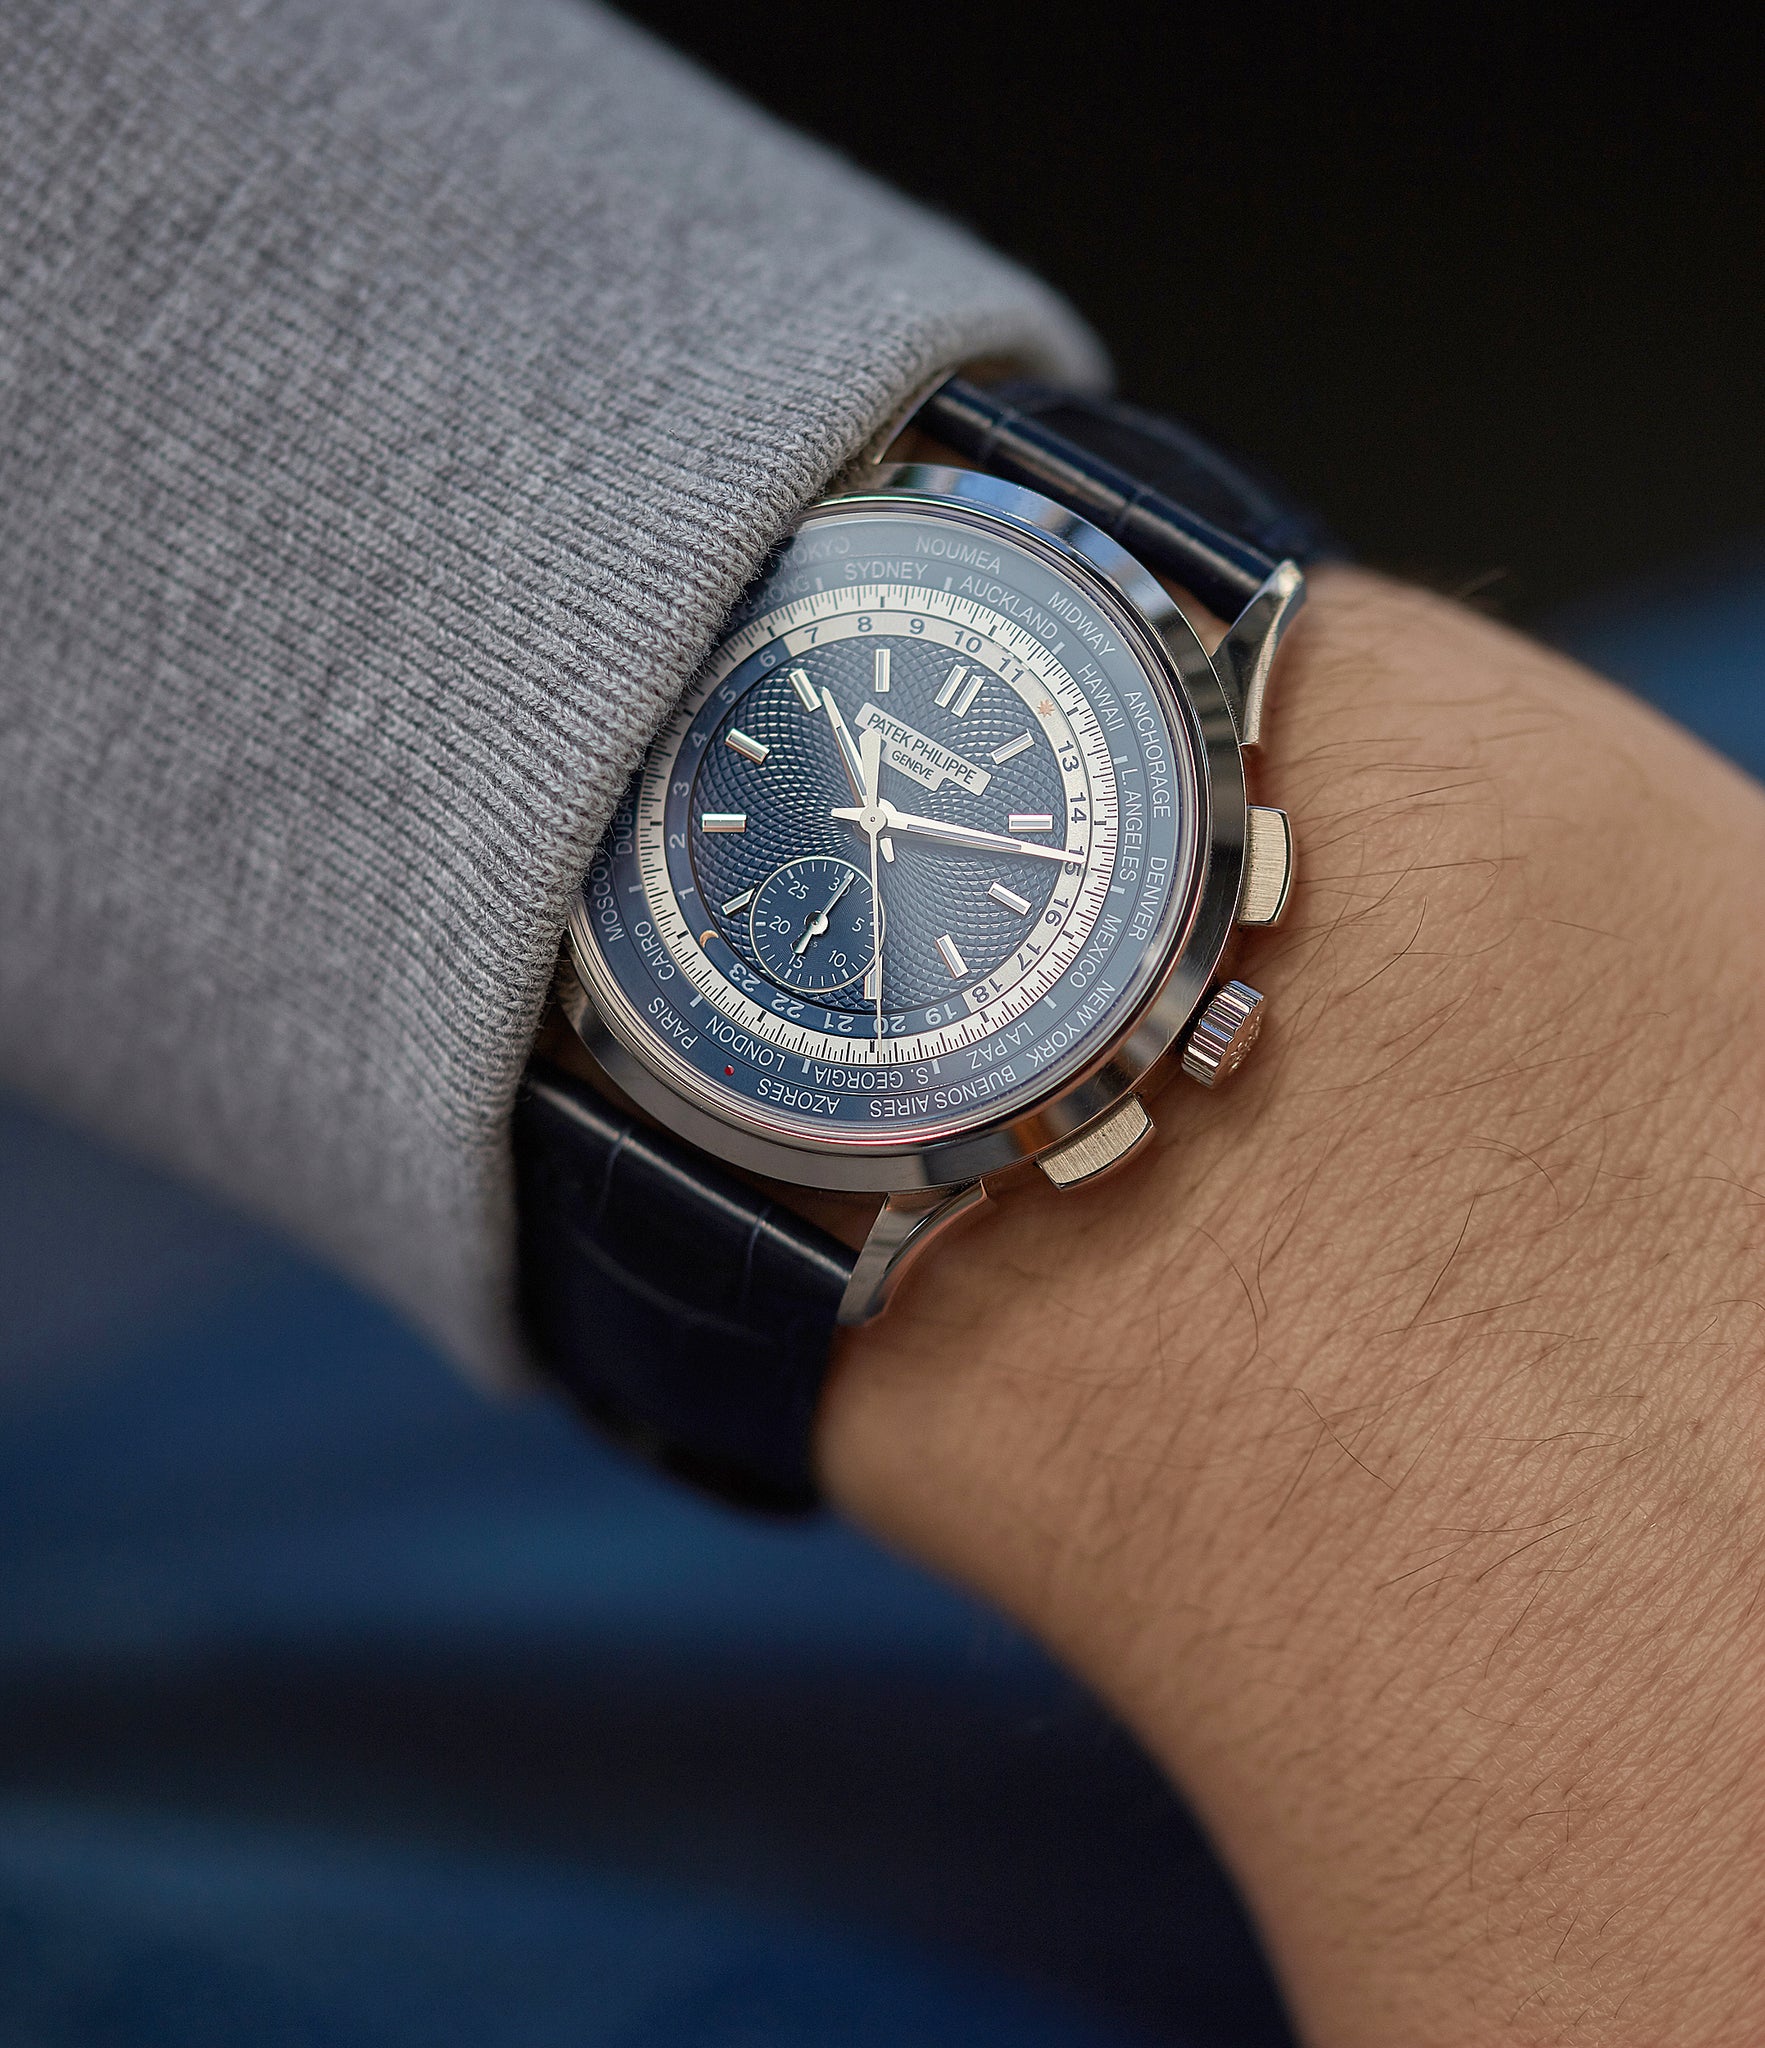 Patek Philippe 5930G-001 World Time Chronograph | Buy pre-owned 5930G ...